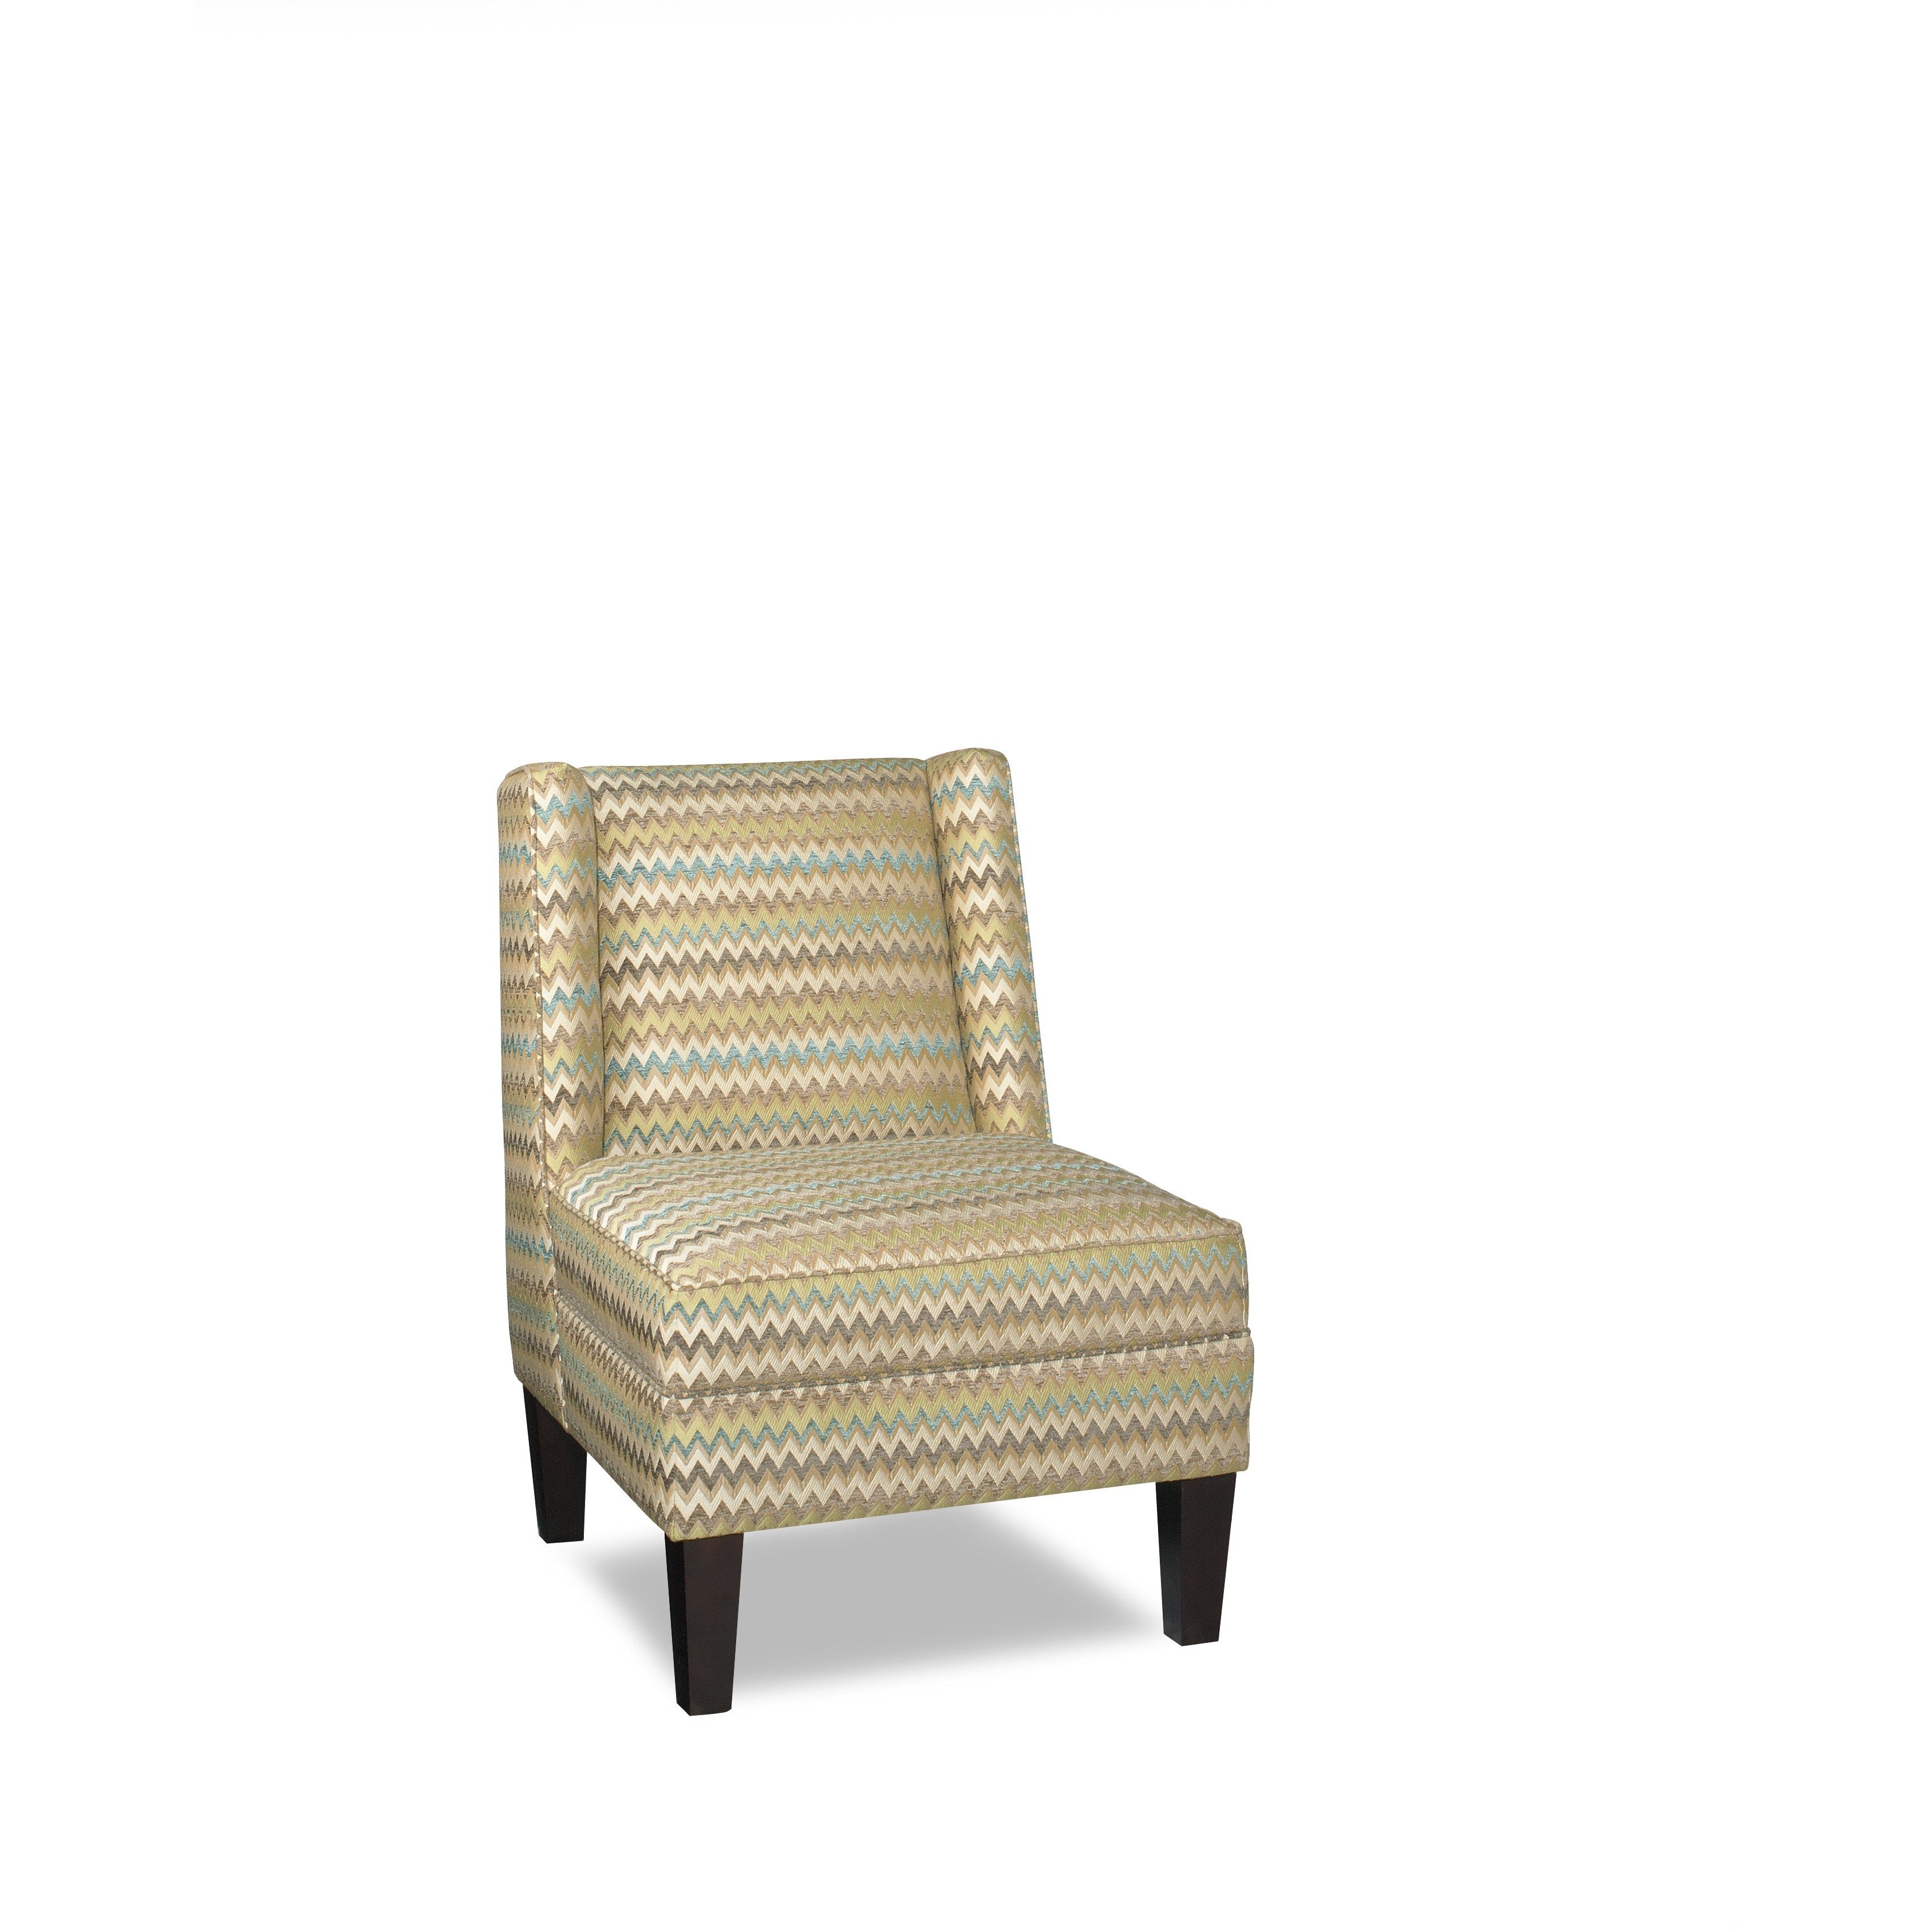 Current Macie Side Chairs Intended For Shop Macie Taupe Accent Chair – Free Shipping Today – Overstock (View 4 of 20)